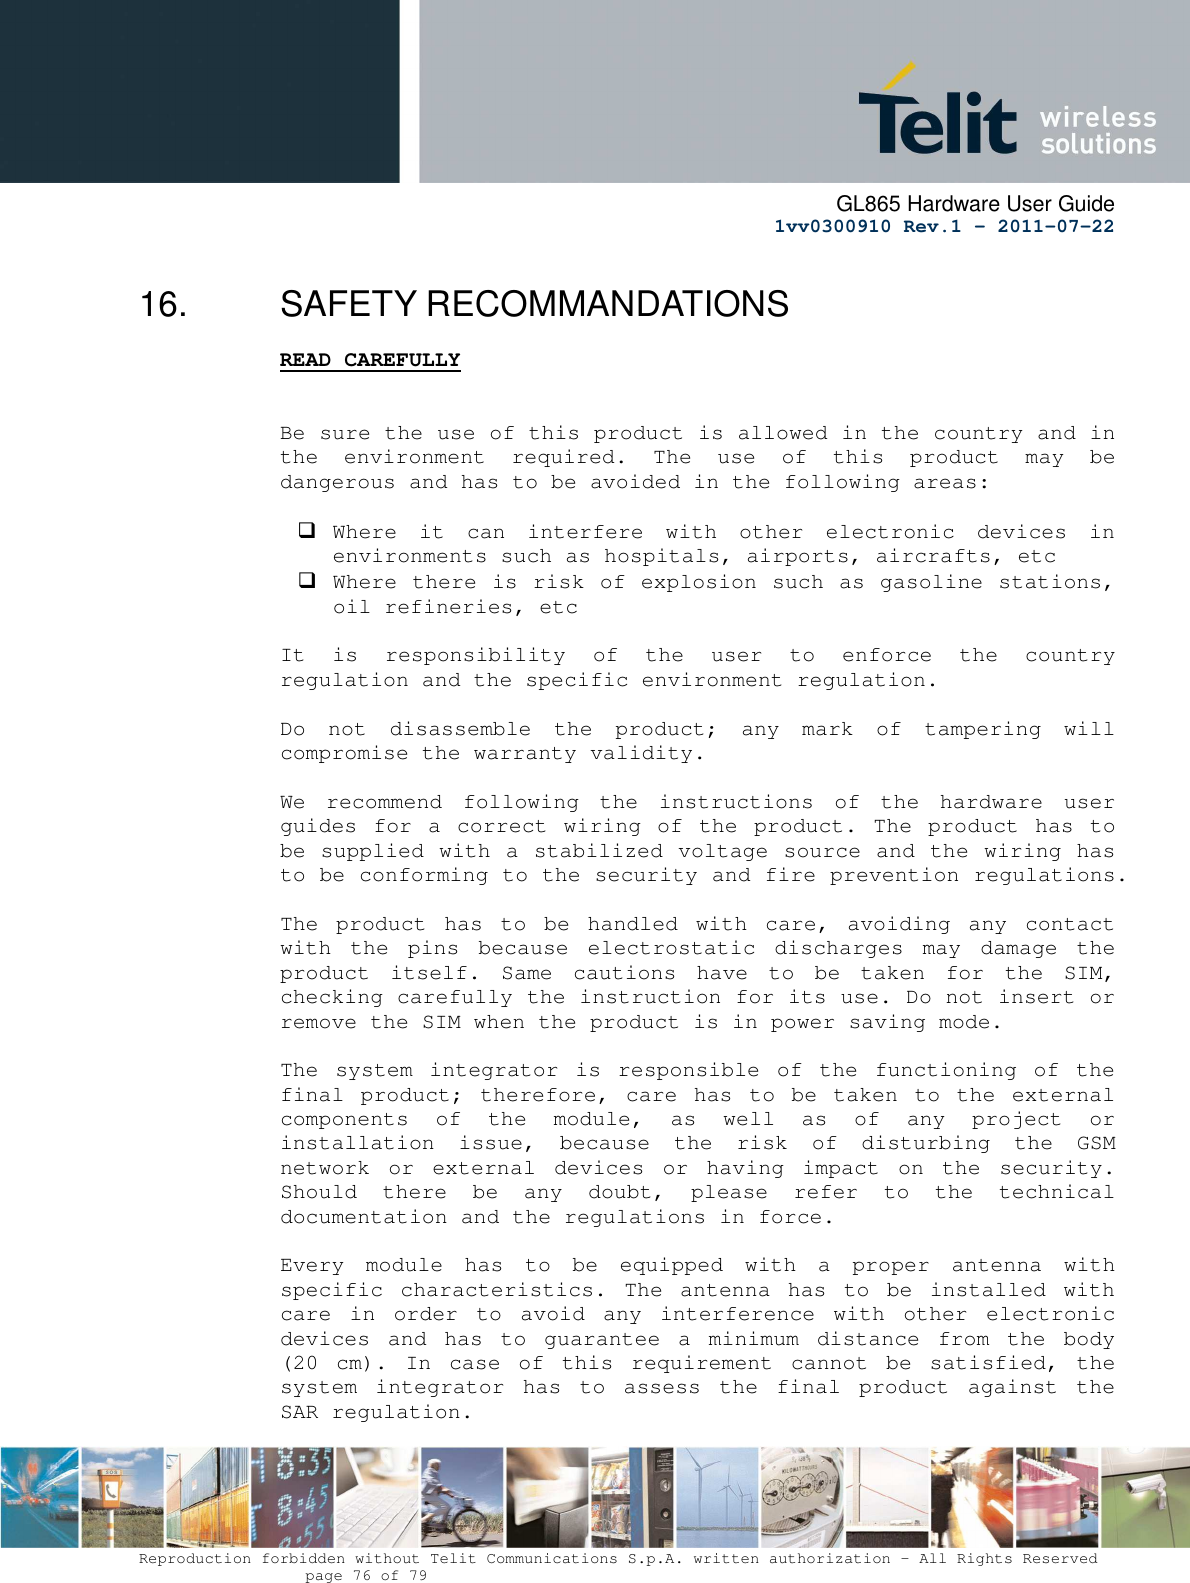      GL865 Hardware User Guide     1vv0300910 Rev.1 – 2011-07-22       Reproduction forbidden without Telit Communications S.p.A. written authorization - All Rights Reserved    page 76 of 79  16.  SAFETY RECOMMANDATIONS READ CAREFULLY   Be sure the use of this product is allowed in the country and in the  environment  required.  The  use  of  this  product  may  be dangerous and has to be avoided in the following areas:   Where  it  can  interfere  with  other  electronic  devices  in environments such as hospitals, airports, aircrafts, etc  Where there is risk of explosion such as gasoline stations, oil refineries, etc   It  is  responsibility  of  the  user  to  enforce  the  country regulation and the specific environment regulation.  Do  not  disassemble  the  product;  any  mark  of  tampering  will compromise the warranty validity.  We  recommend  following  the  instructions  of  the  hardware  user guides for a correct  wiring  of  the  product.  The  product  has to be supplied with a stabilized voltage source and the wiring has to be conforming to the security and fire prevention regulations.  The  product  has  to  be  handled  with  care,  avoiding  any  contact with  the  pins  because  electrostatic  discharges  may  damage  the product  itself.  Same  cautions  have  to  be  taken  for  the  SIM, checking carefully the instruction for its use. Do not insert or remove the SIM when the product is in power saving mode.  The  system  integrator  is  responsible  of  the  functioning  of  the final  product;  therefore,  care  has  to be  taken  to  the  external components  of  the  module,  as  well  as  of  any  project  or installation  issue,  because  the  risk  of  disturbing  the  GSM network  or  external  devices  or  having  impact  on  the  security. Should  there  be  any  doubt,  please  refer  to  the  technical documentation and the regulations in force.  Every  module  has  to  be  equipped  with  a  proper  antenna  with specific  characteristics.  The  antenna  has  to  be  installed  with care  in  order  to  avoid  any  interference  with  other  electronic devices  and  has  to  guarantee  a  minimum  distance  from  the  body (20  cm).  In  case  of  this  requirement  cannot  be  satisfied,  the system  integrator  has  to  assess  the  final  product  against  the SAR regulation.  